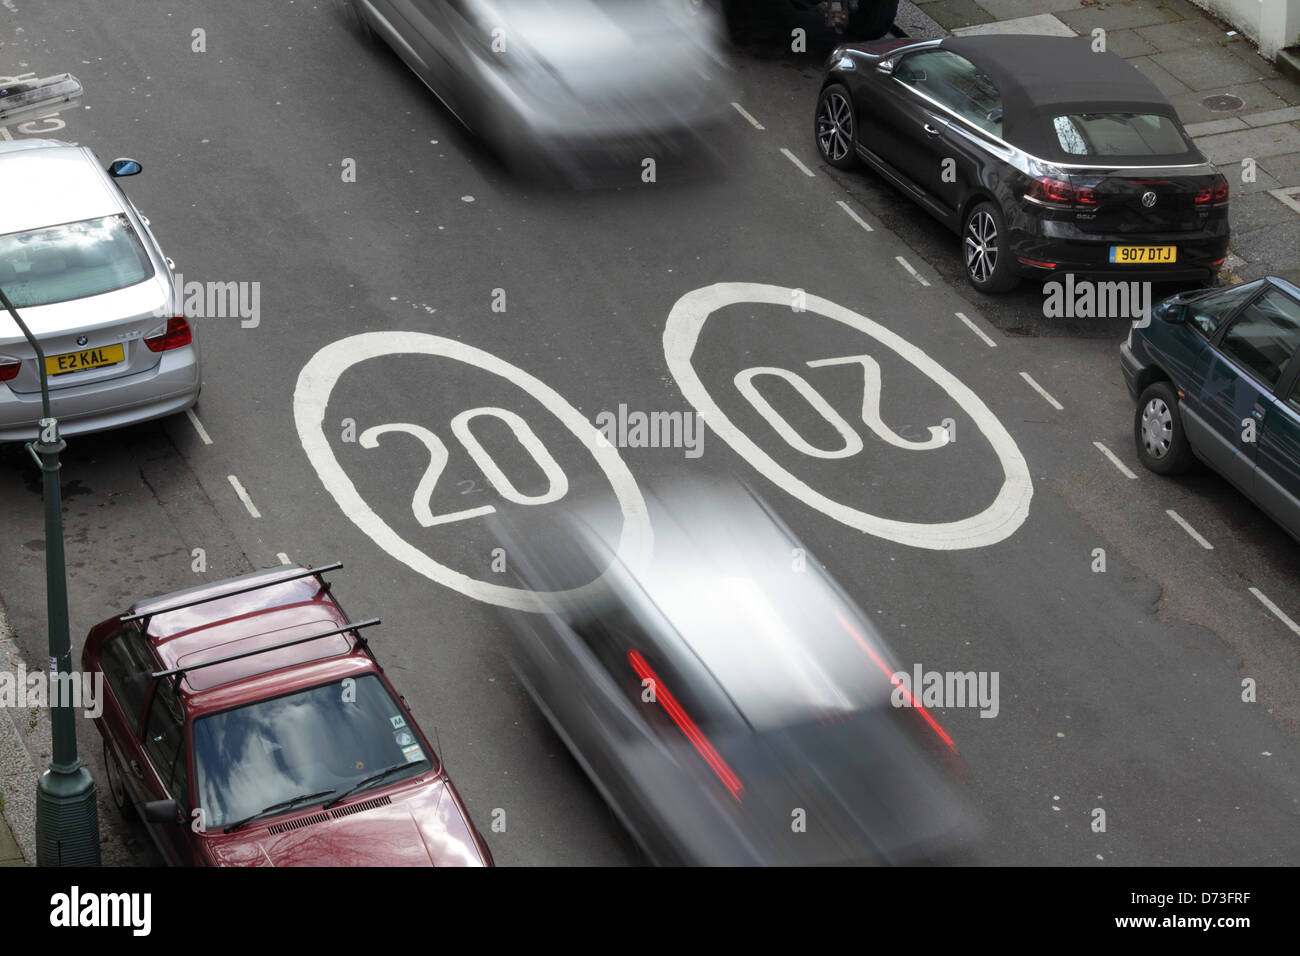 20 mph speed limit signs painted on the road surface in Hove, East Sussex. Stock Photo